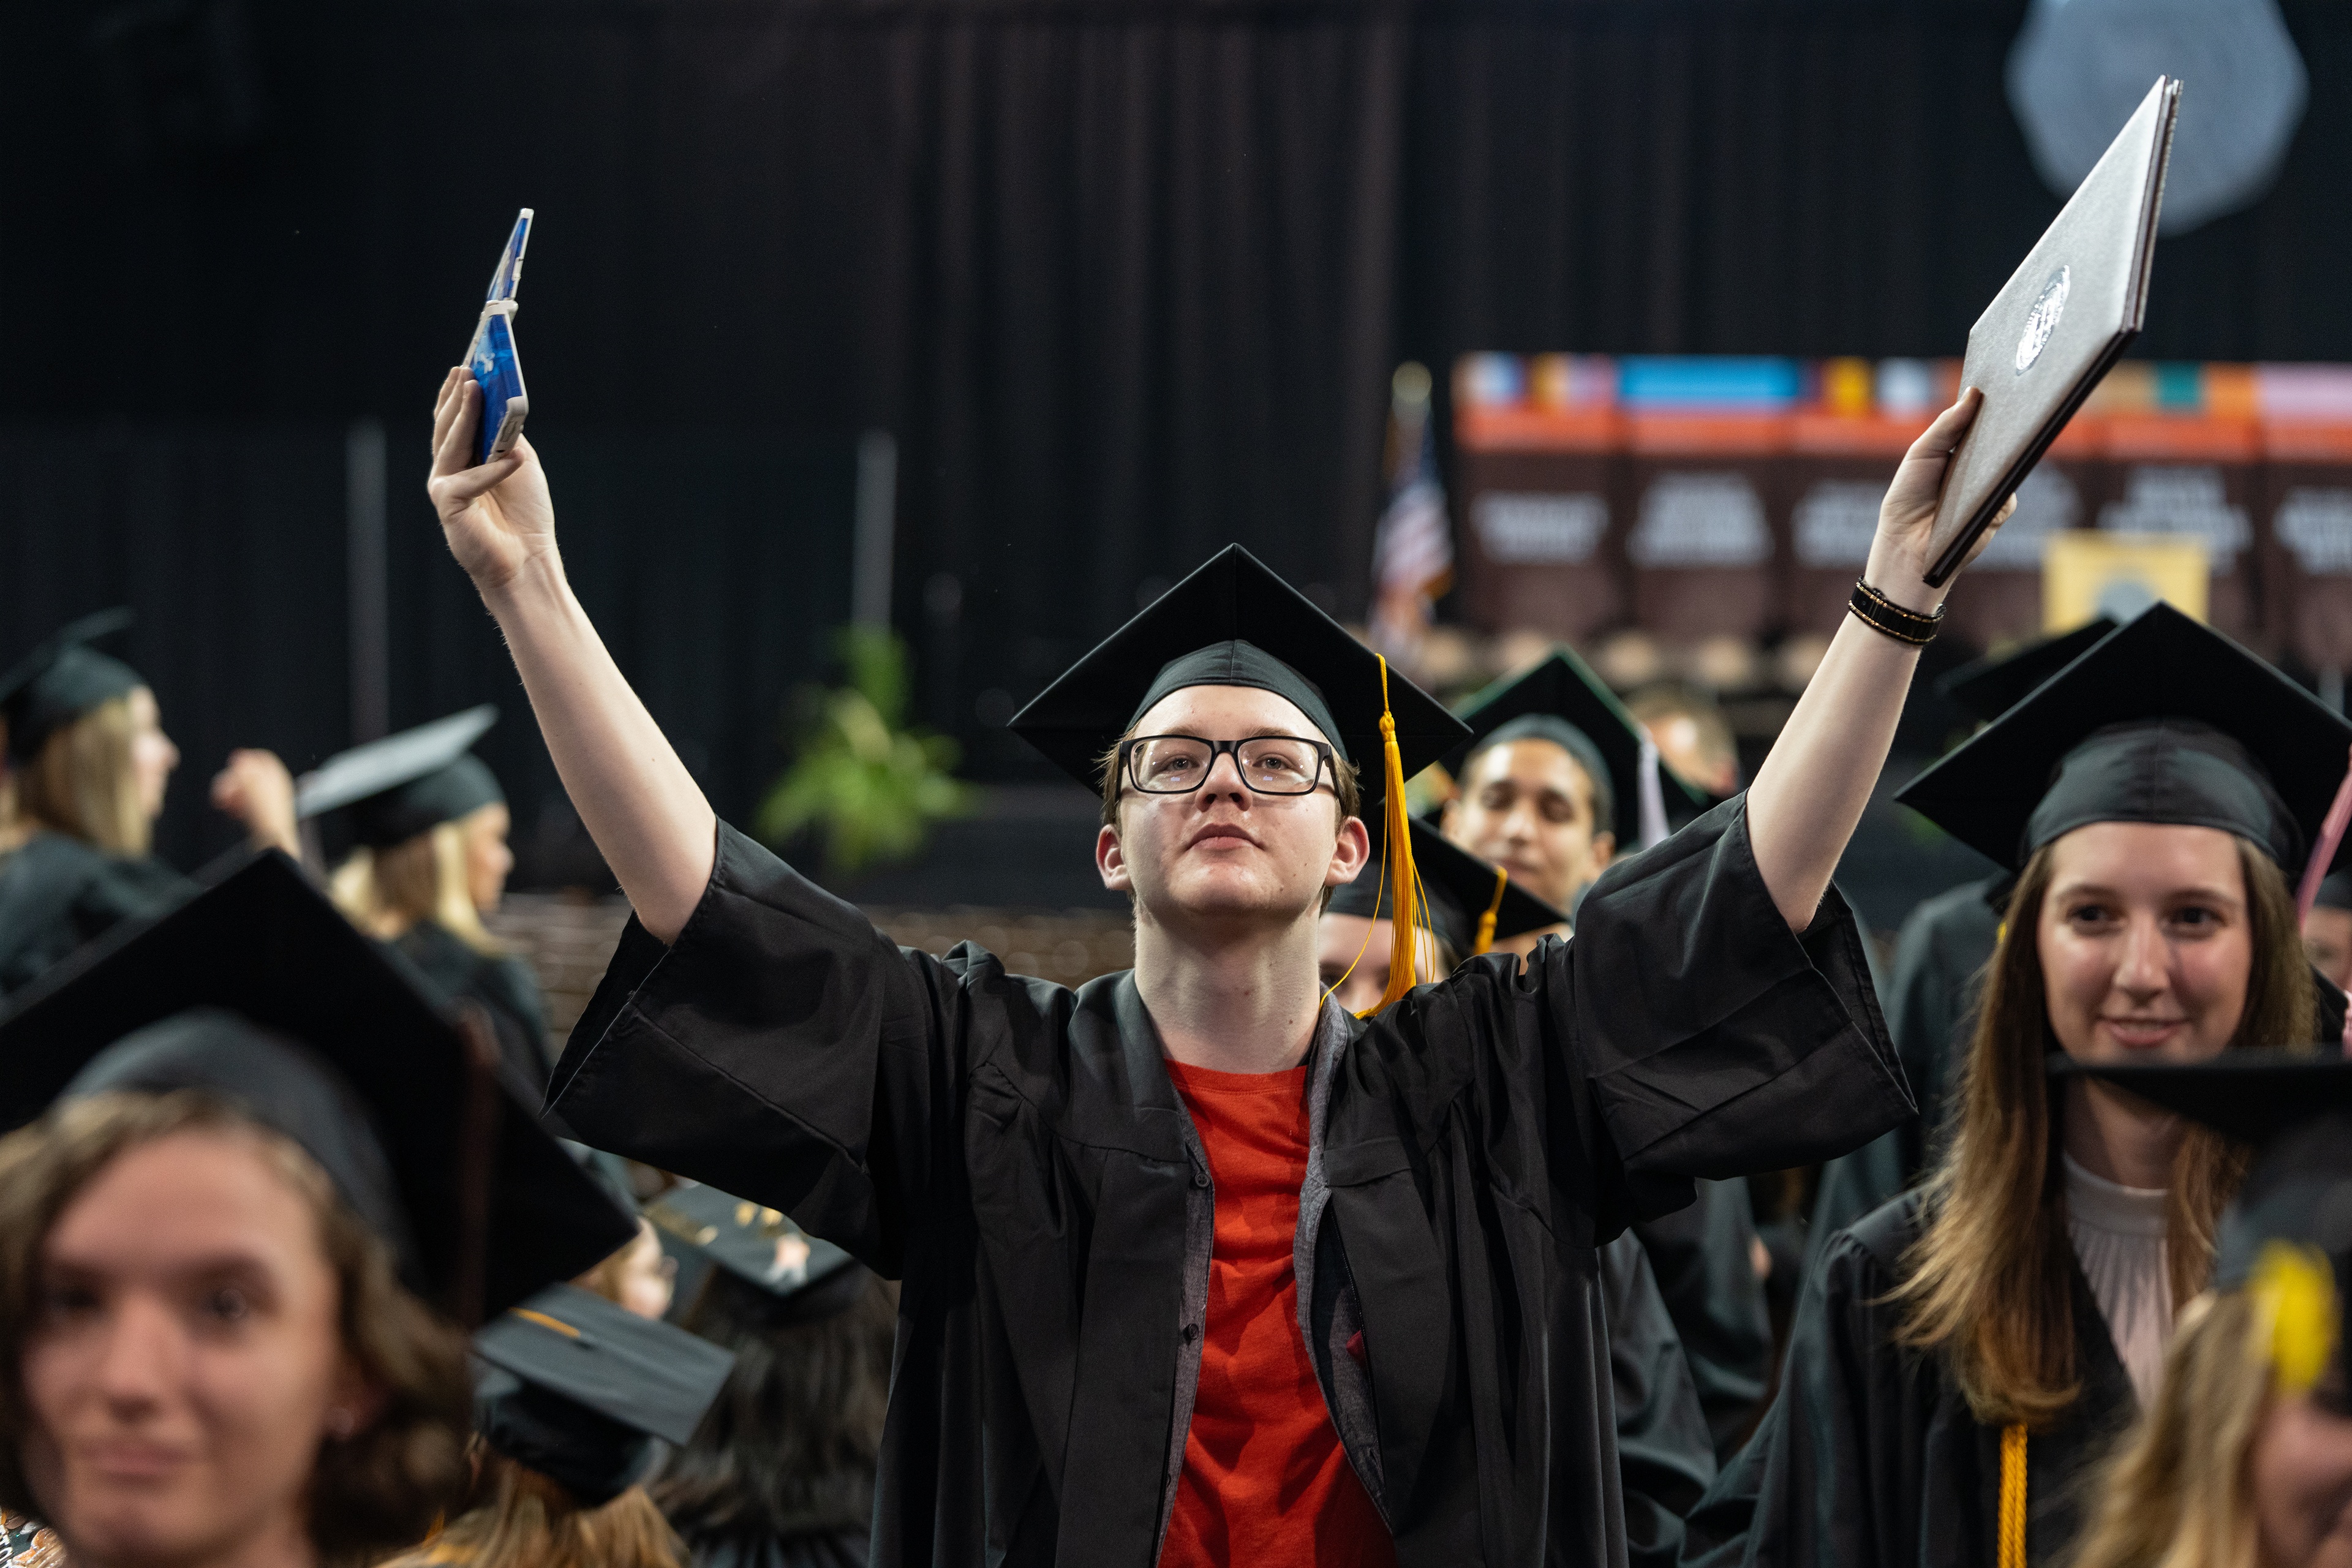 Young man in graduation cap and gown with arms raised